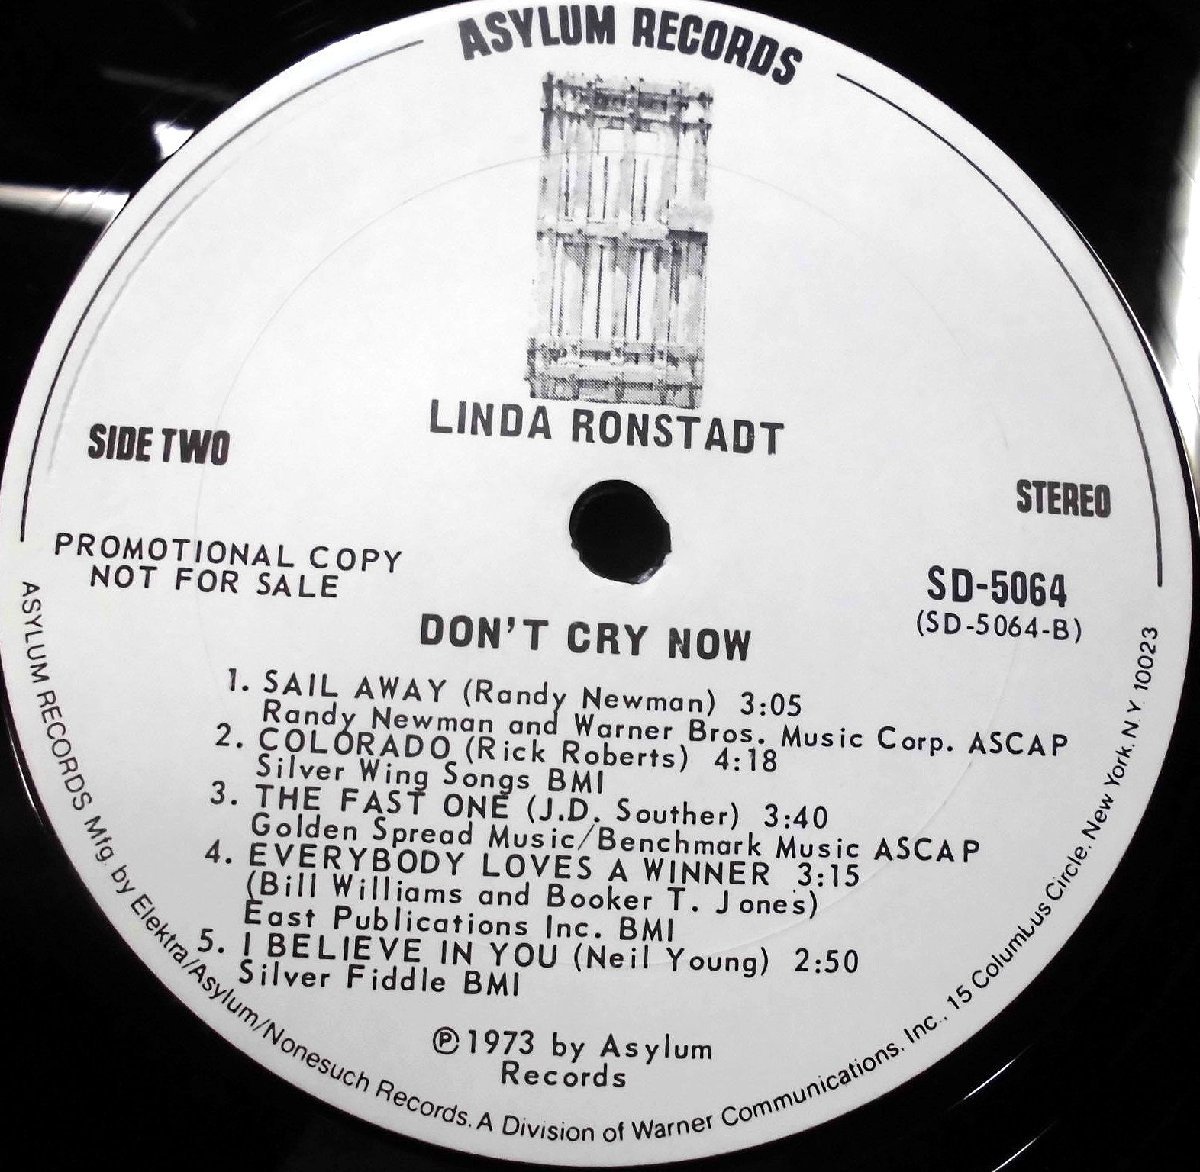 ●US-Asylum Recordsオリジナル””Promo White Labels,w/A1:B1 Copy!!”” Linda Ronstadt / Don't Cry Nowの画像9